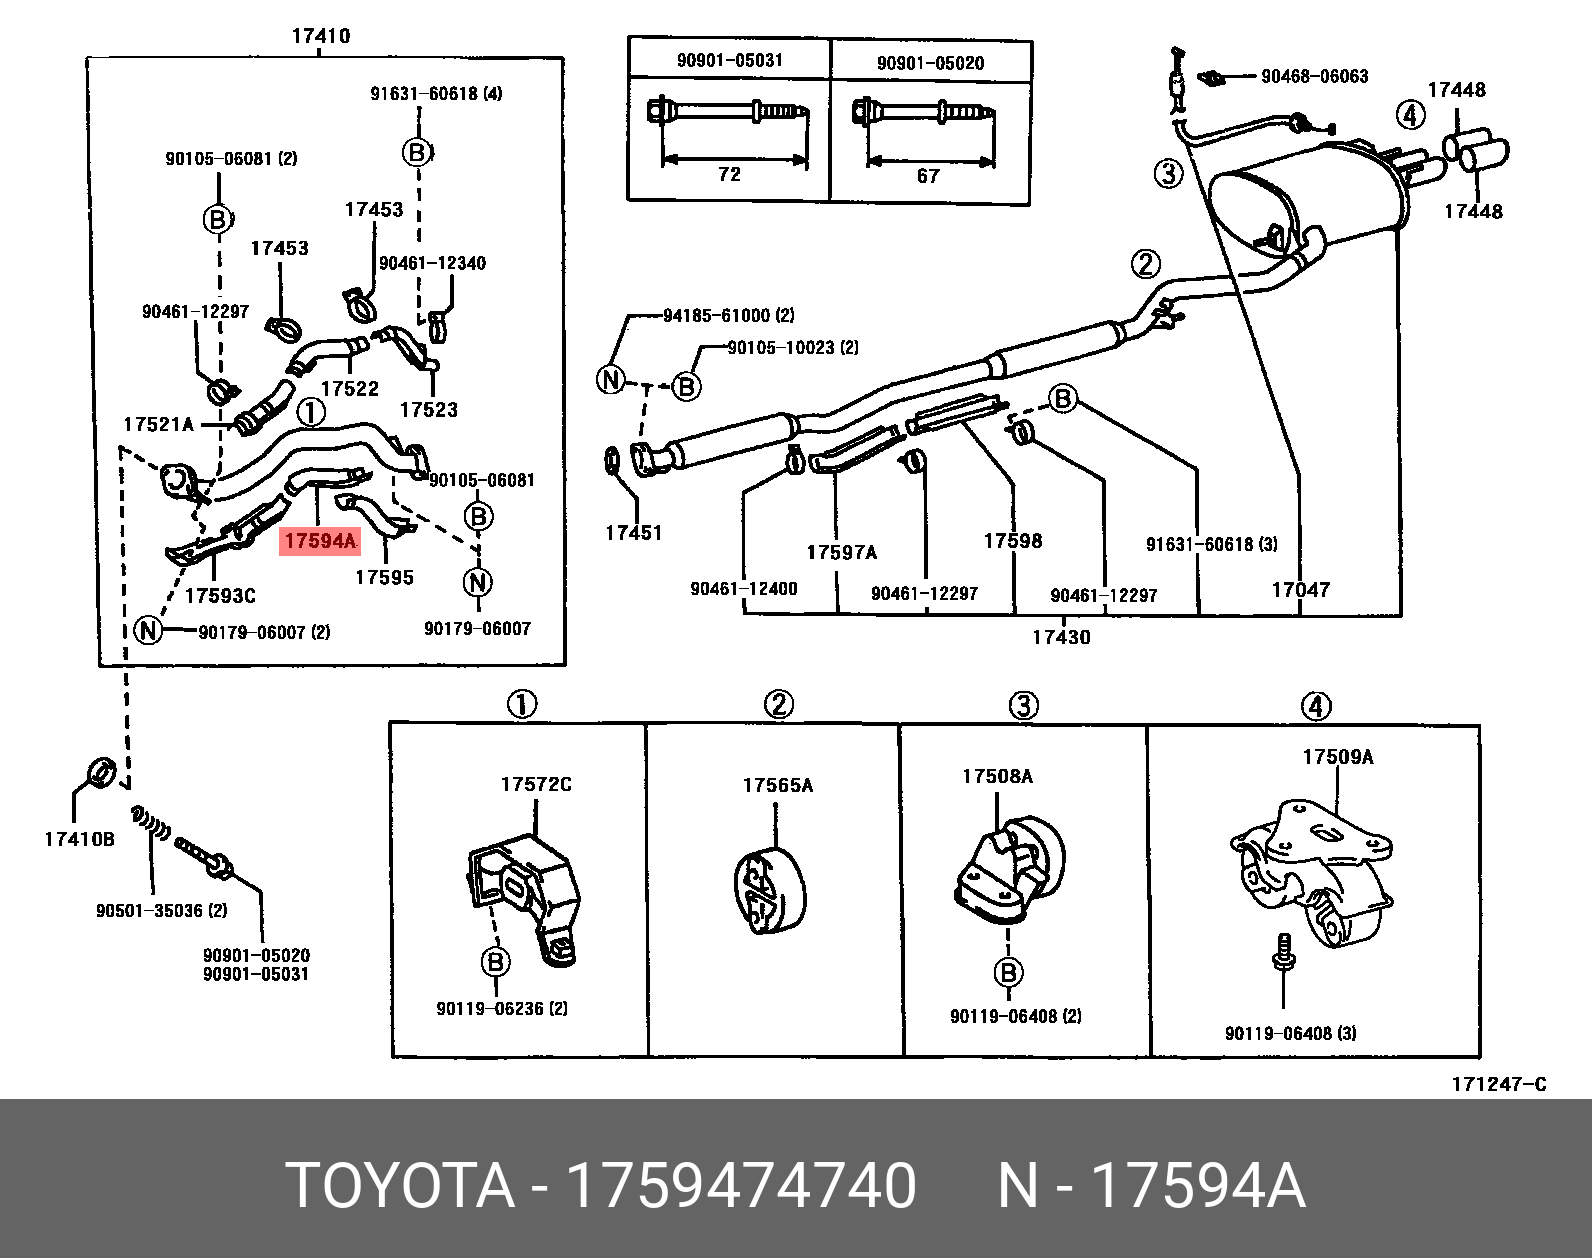 CALDINA 199708 - 200209, PROTECTOR, EXHAUST PIPE, LOWER NO.2